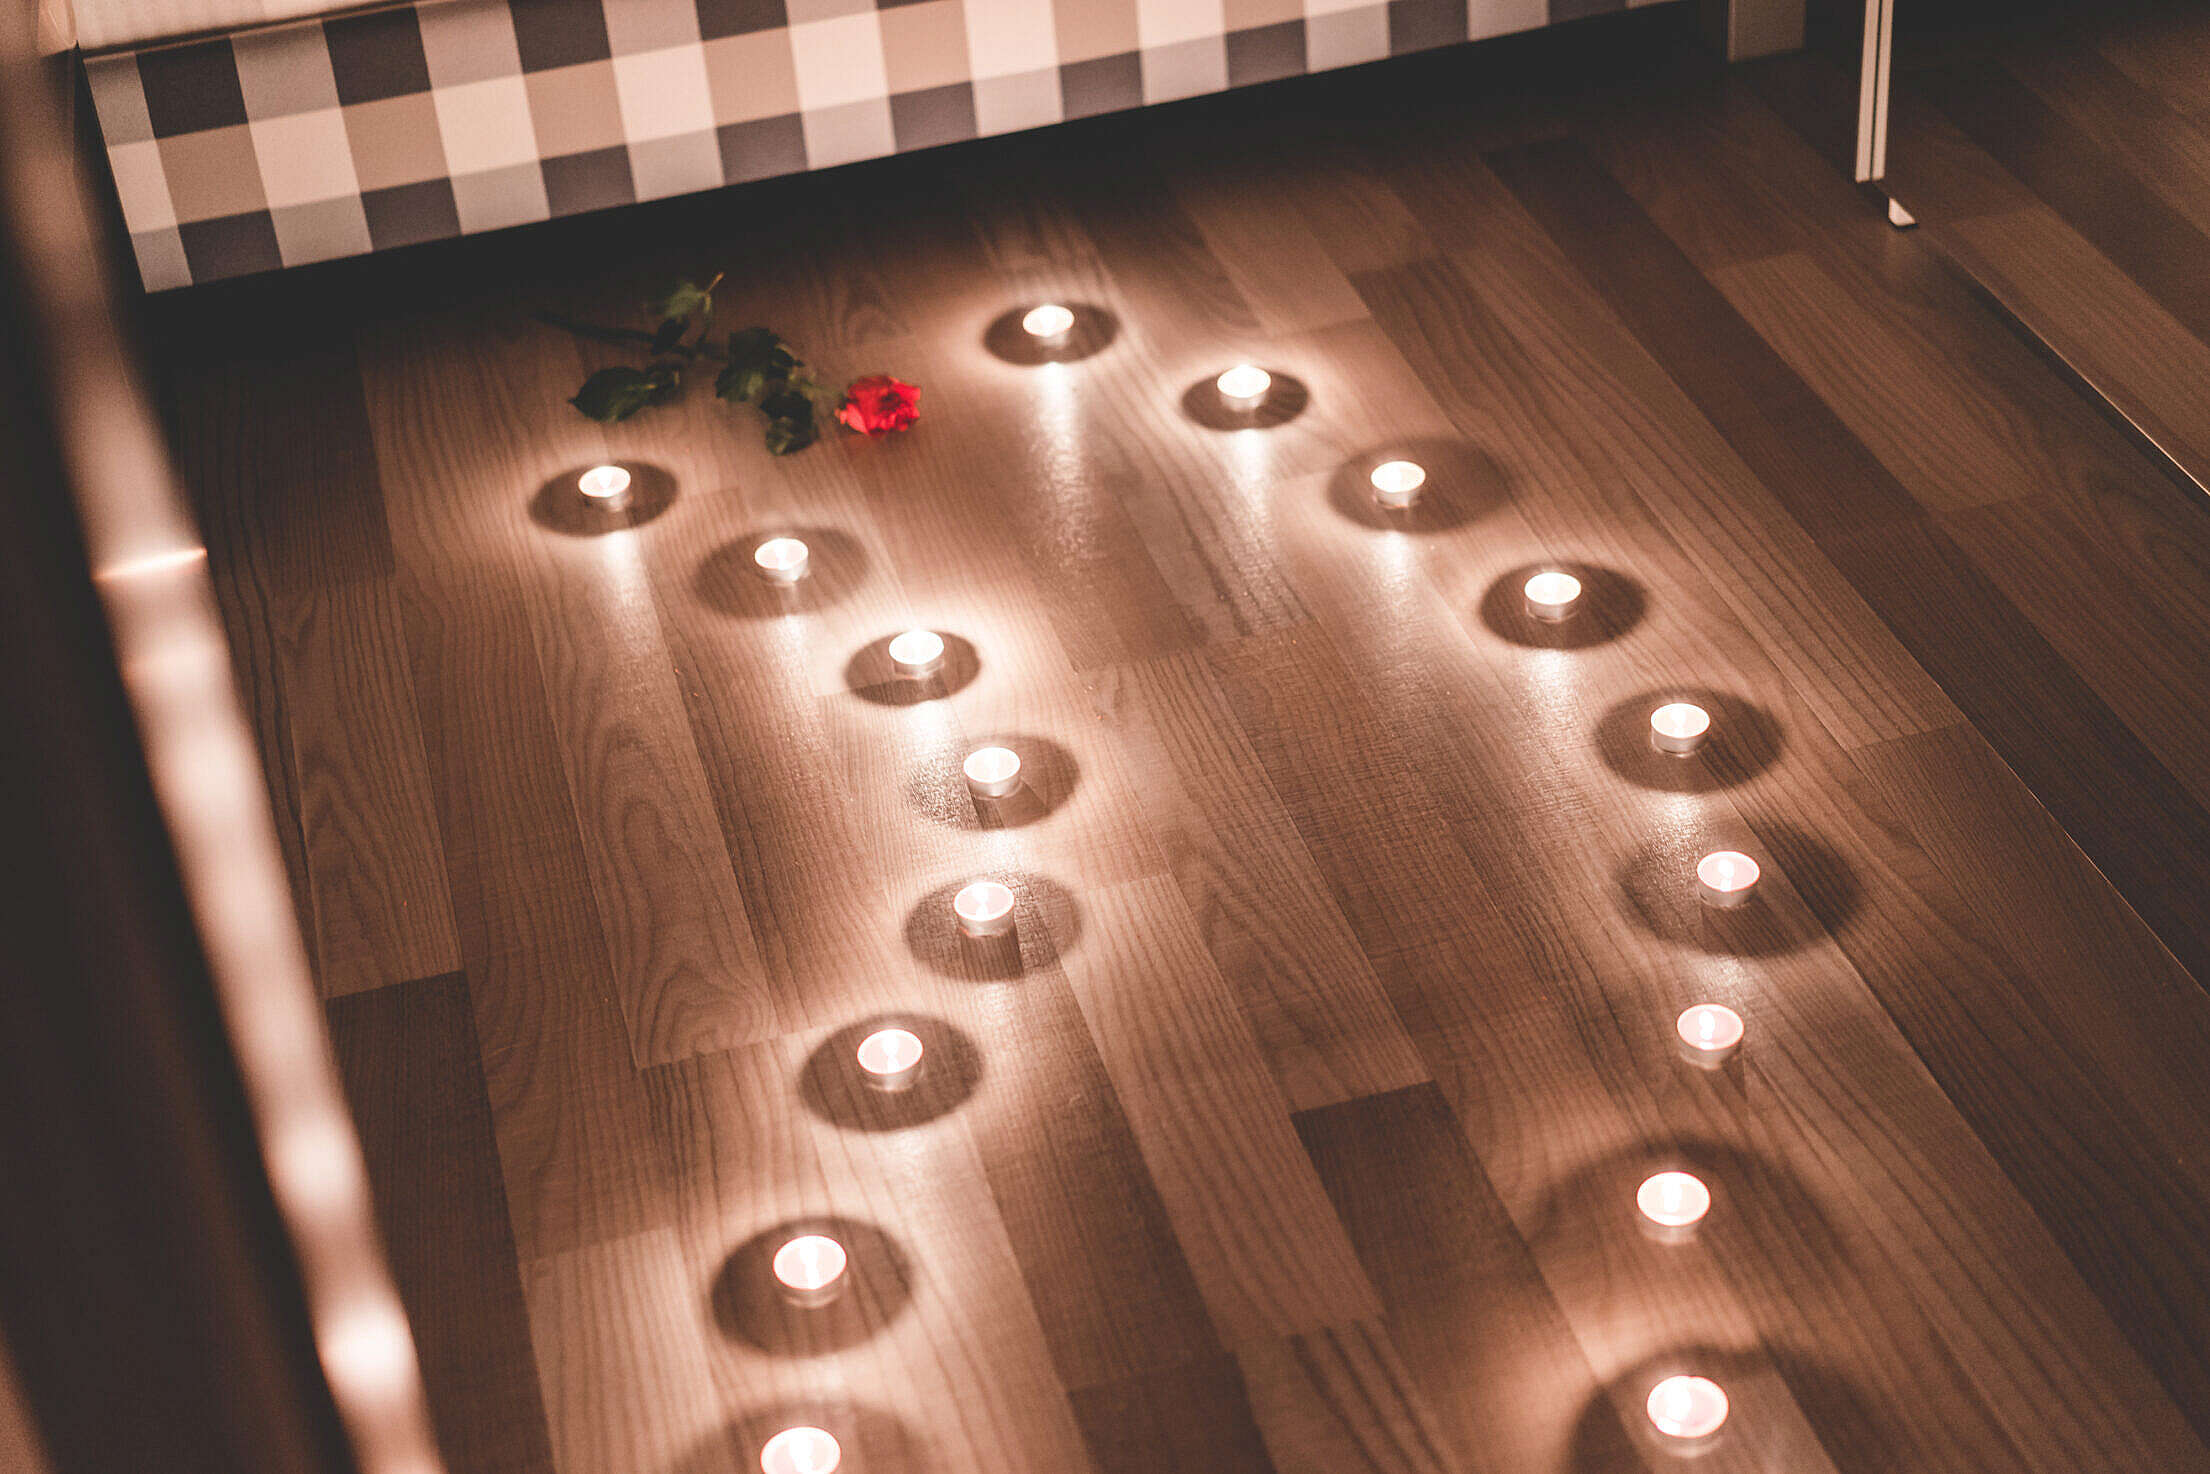 Romantic Candles as a Pathway in a Bedroom Free Stock Photo